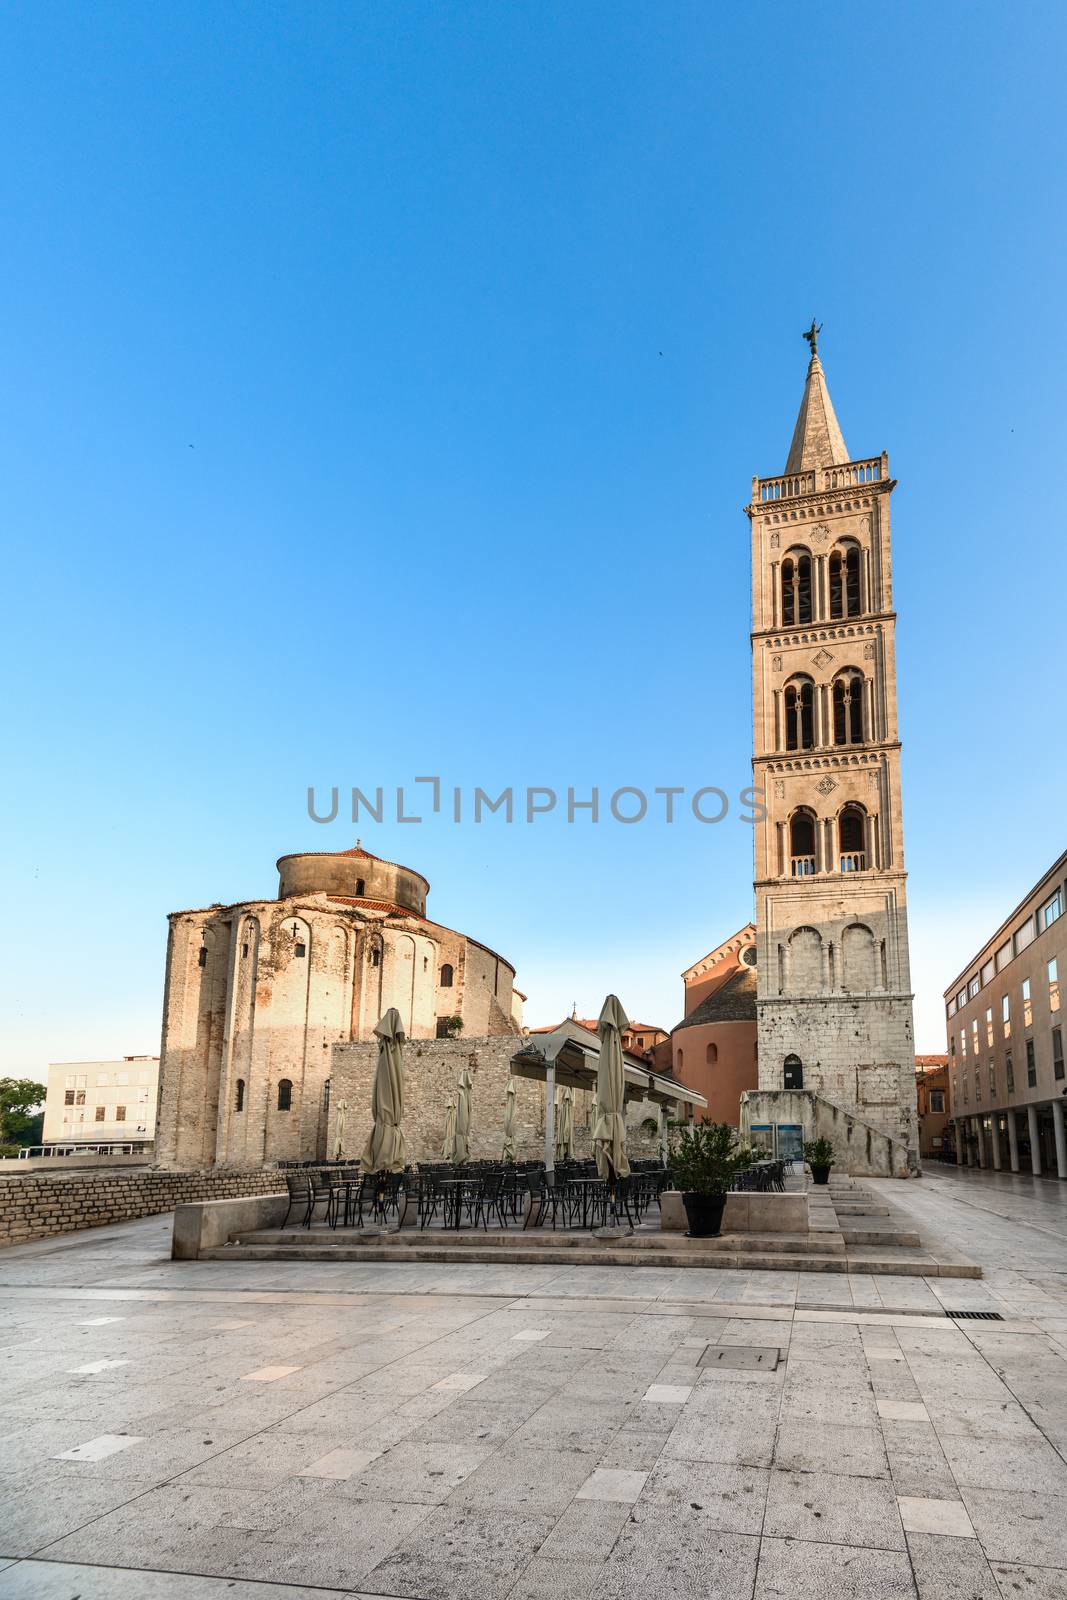 Zadar, Croatia - July 3 2018: Empty streets early in the morning are an unusual sight in high tourist season, but it offers a unique experience of the city and it's attractions